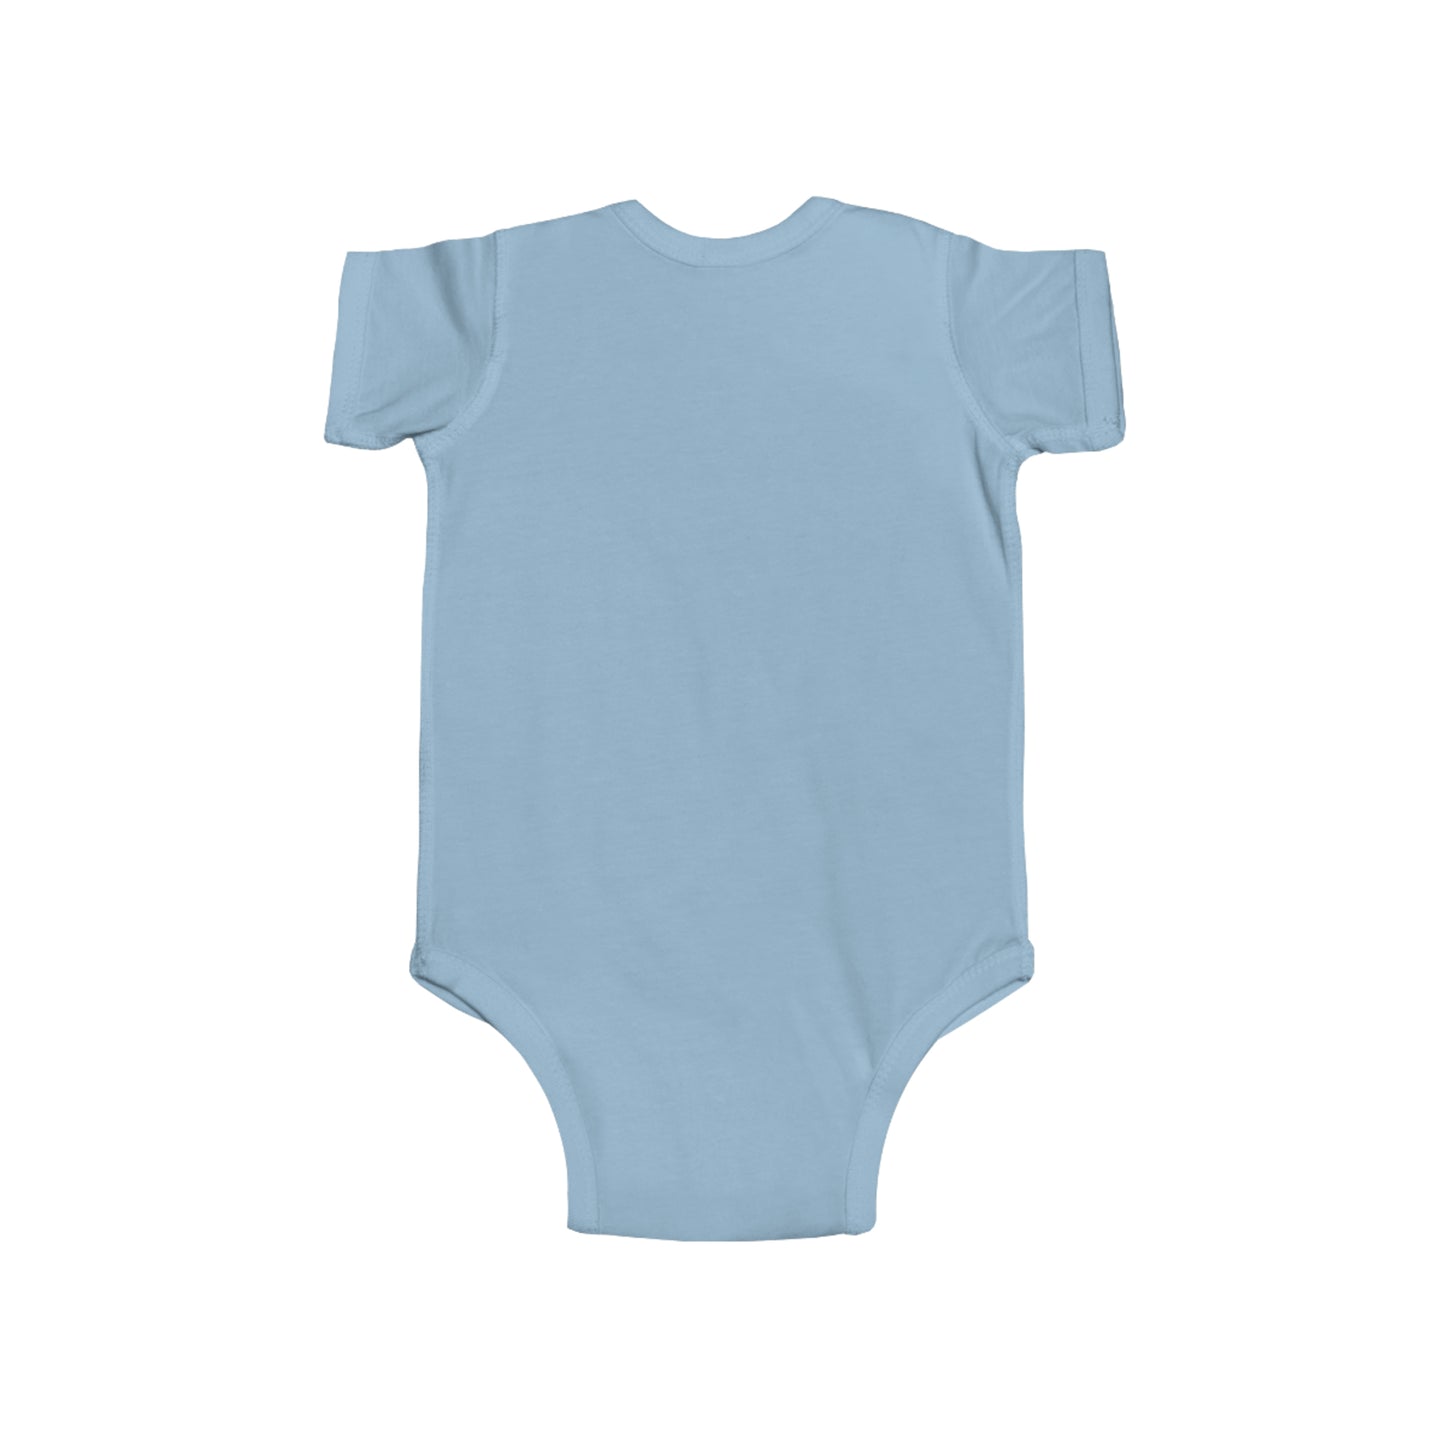 Love, New Arrival, Handle With Care- Baby, Infant, Toddler, Soft Cotton, Onesie